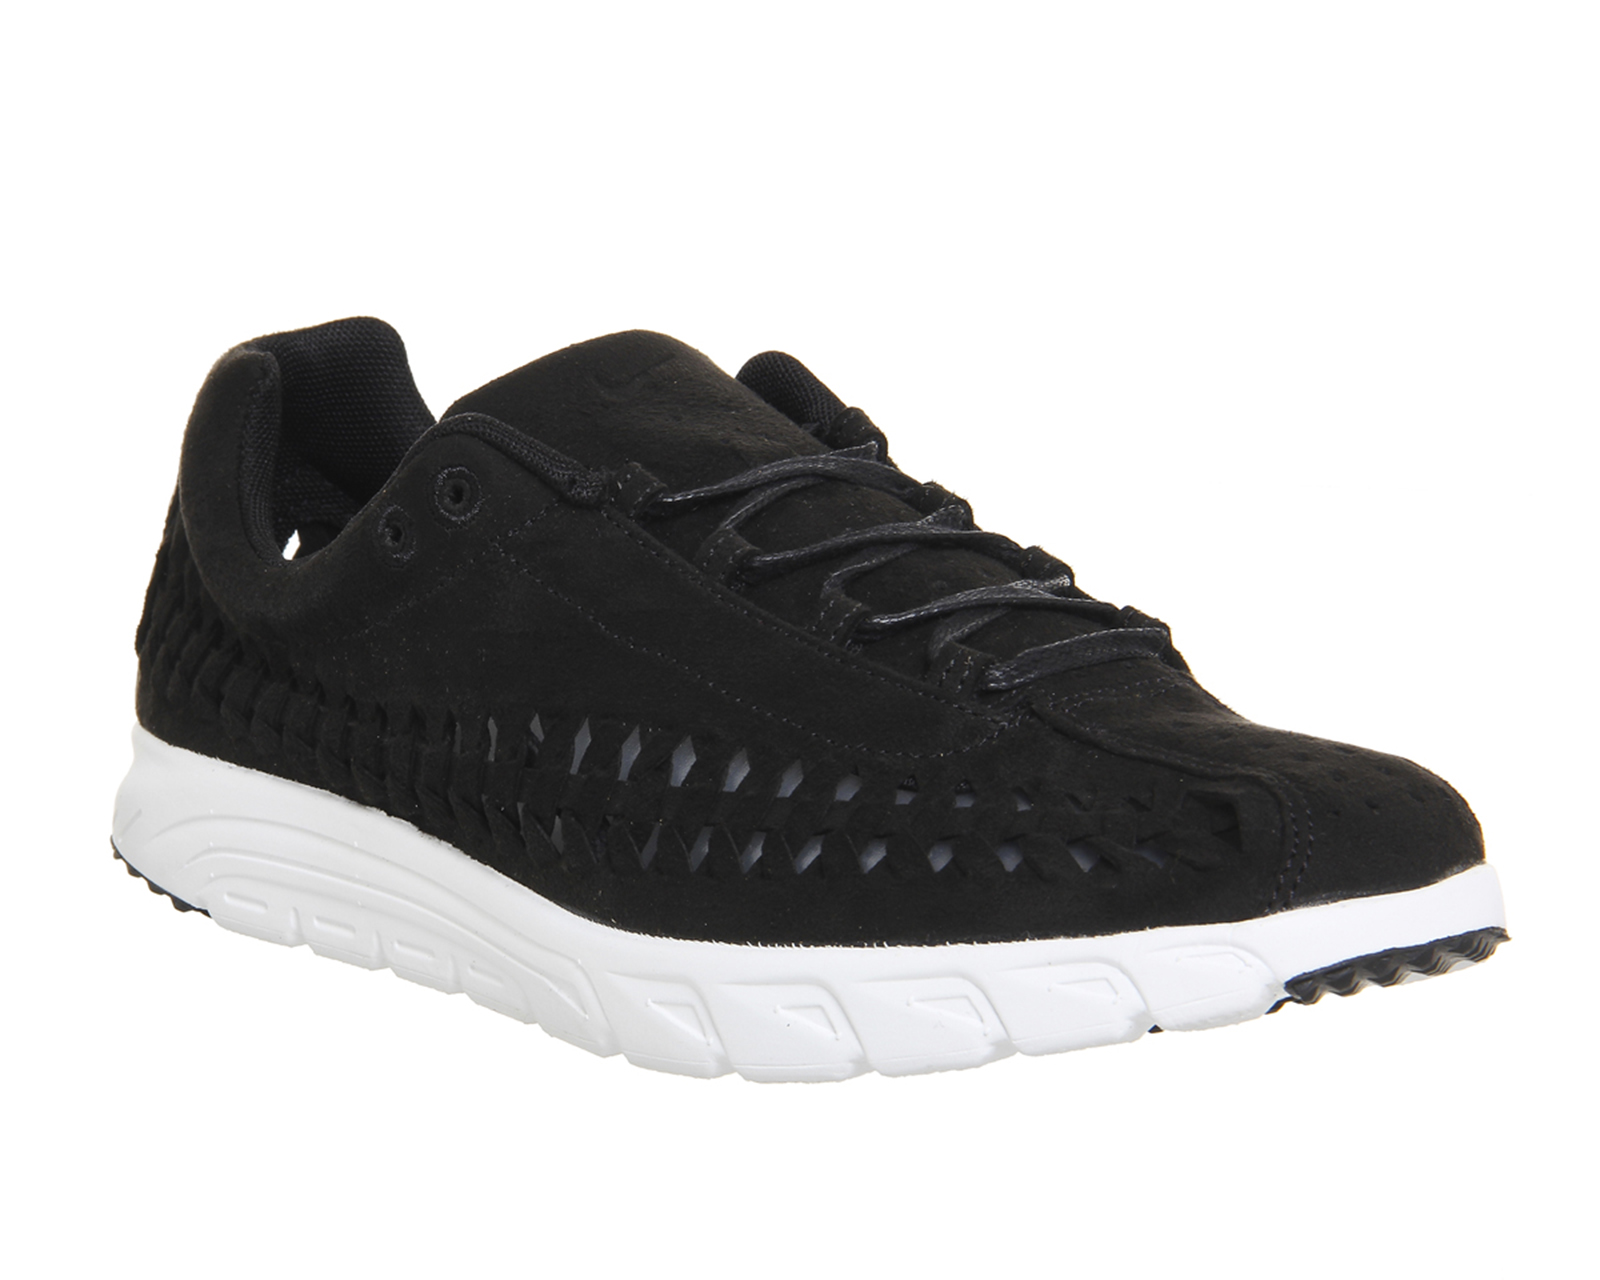 Nike Mayfly Woven Black - His trainers